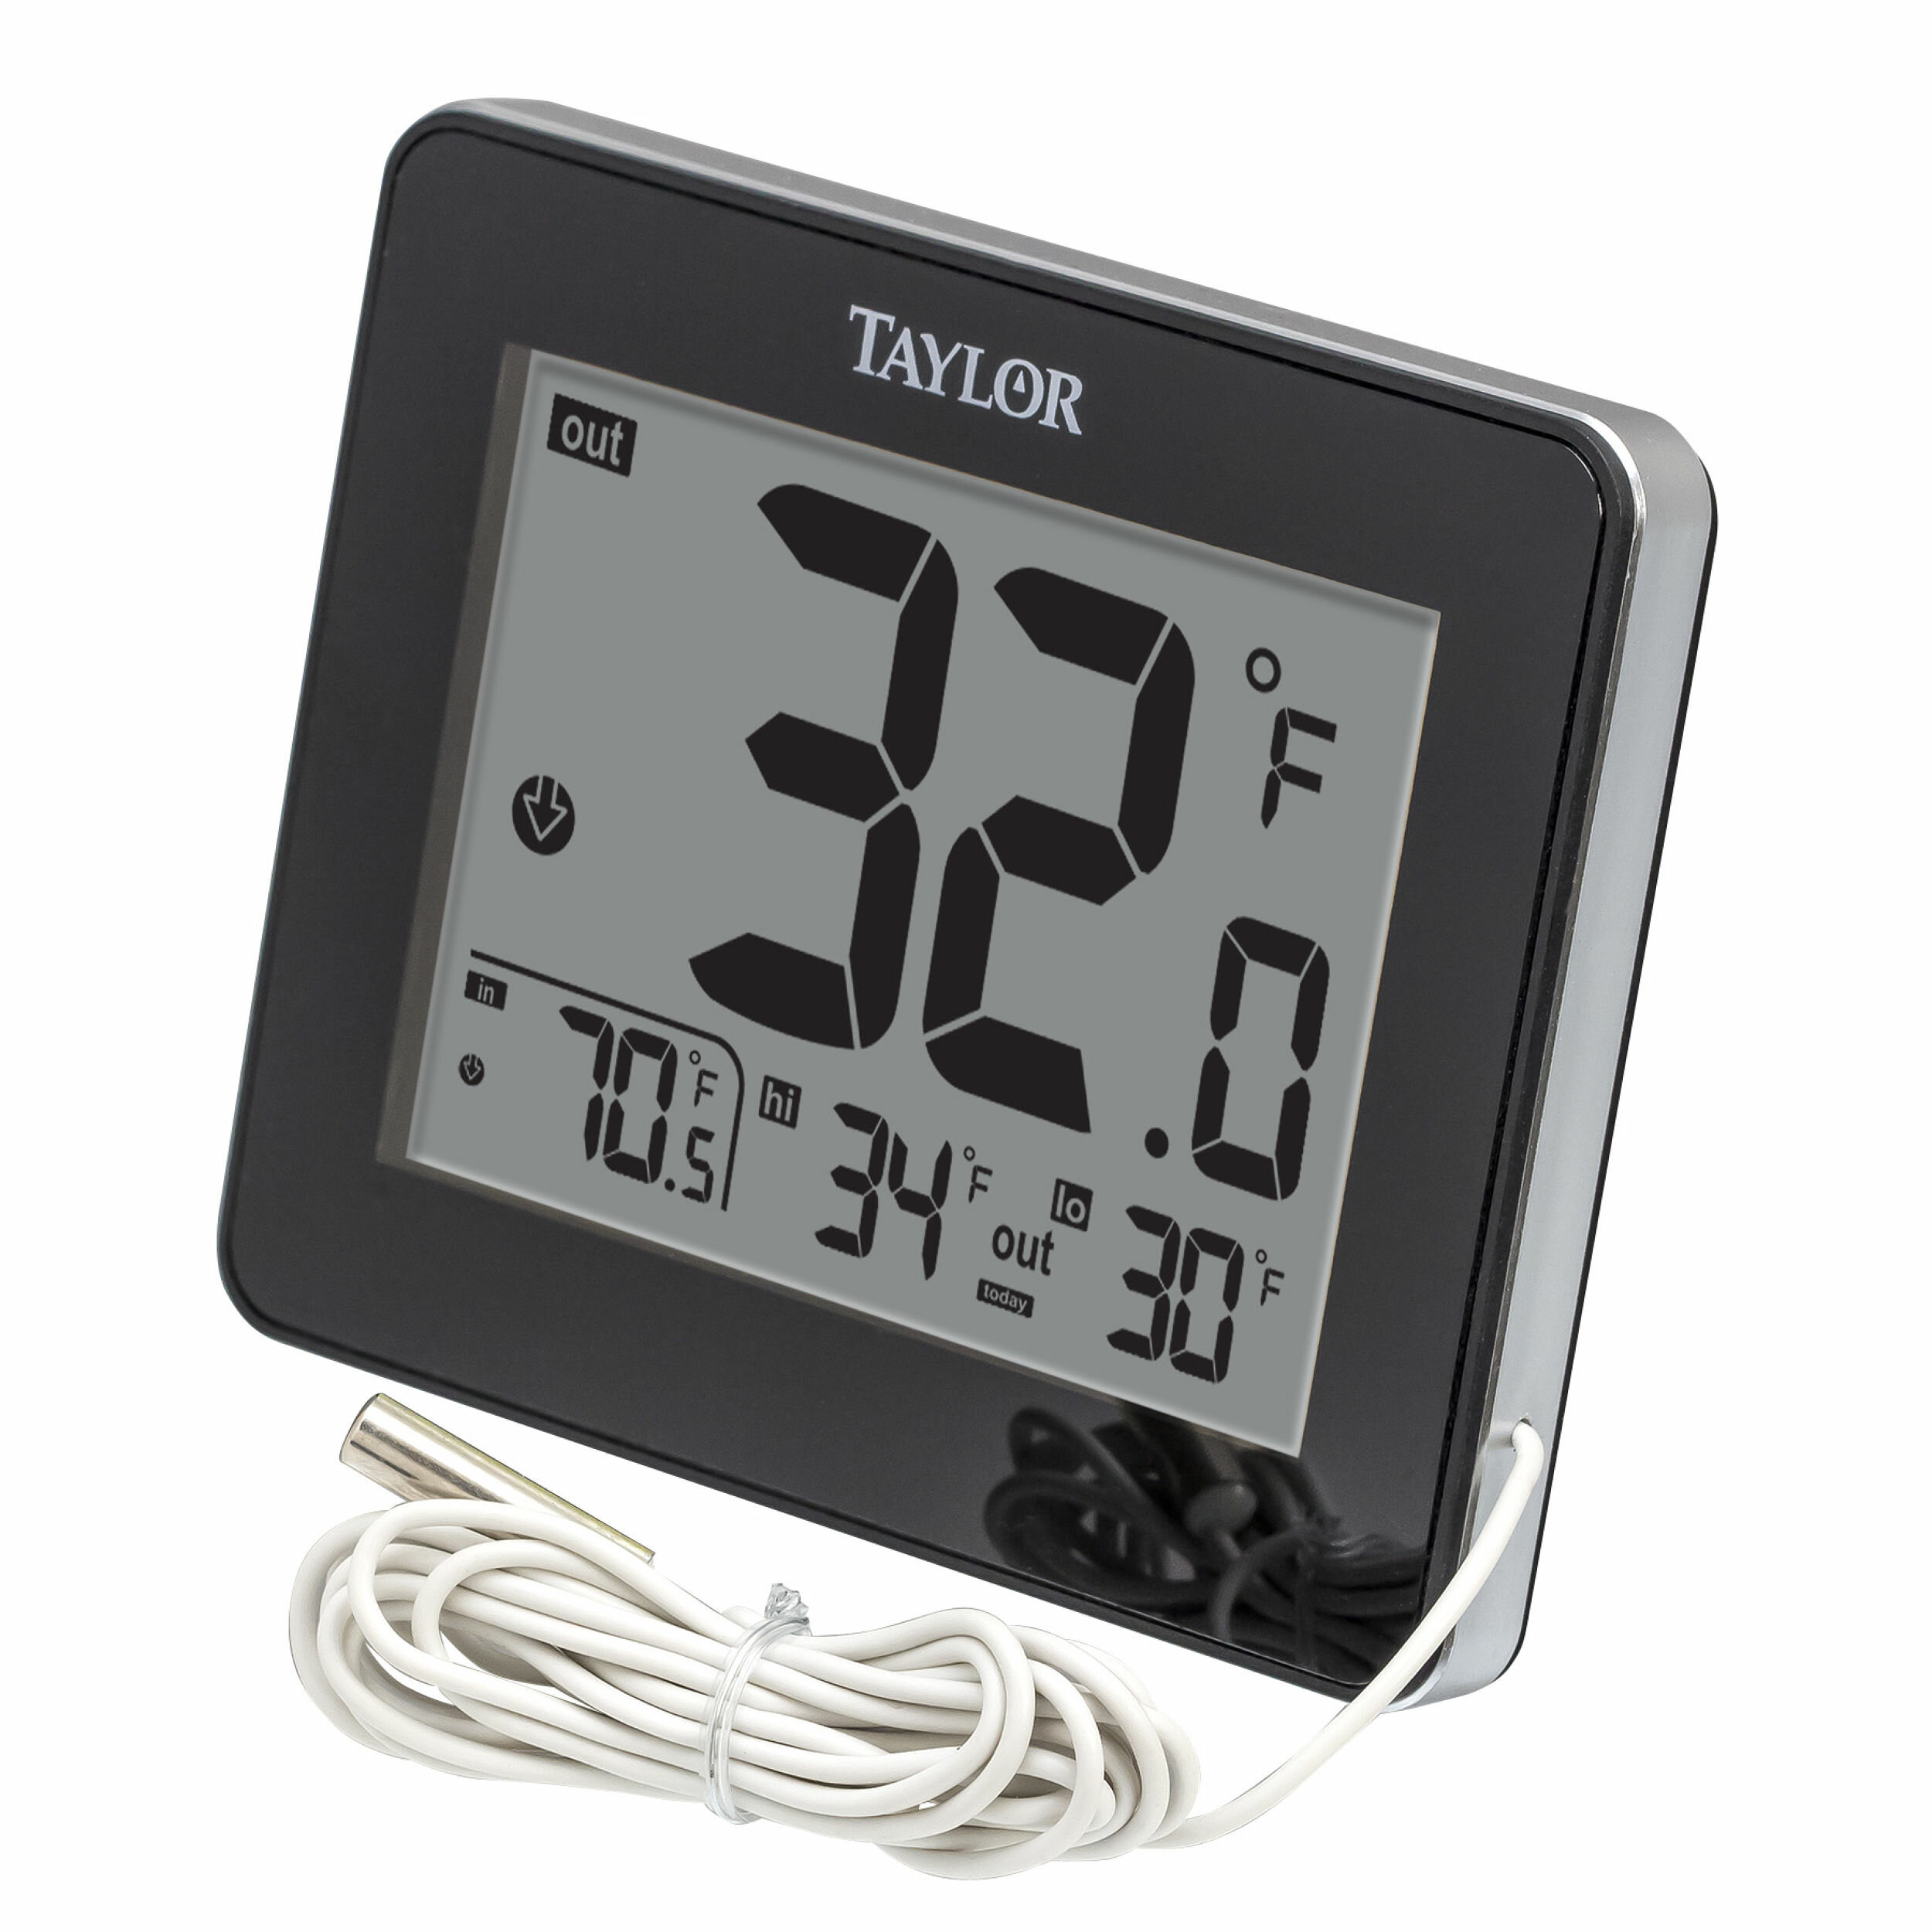 Taylor Wired Digital Indoor/Outdoor Thermometer & Reviews